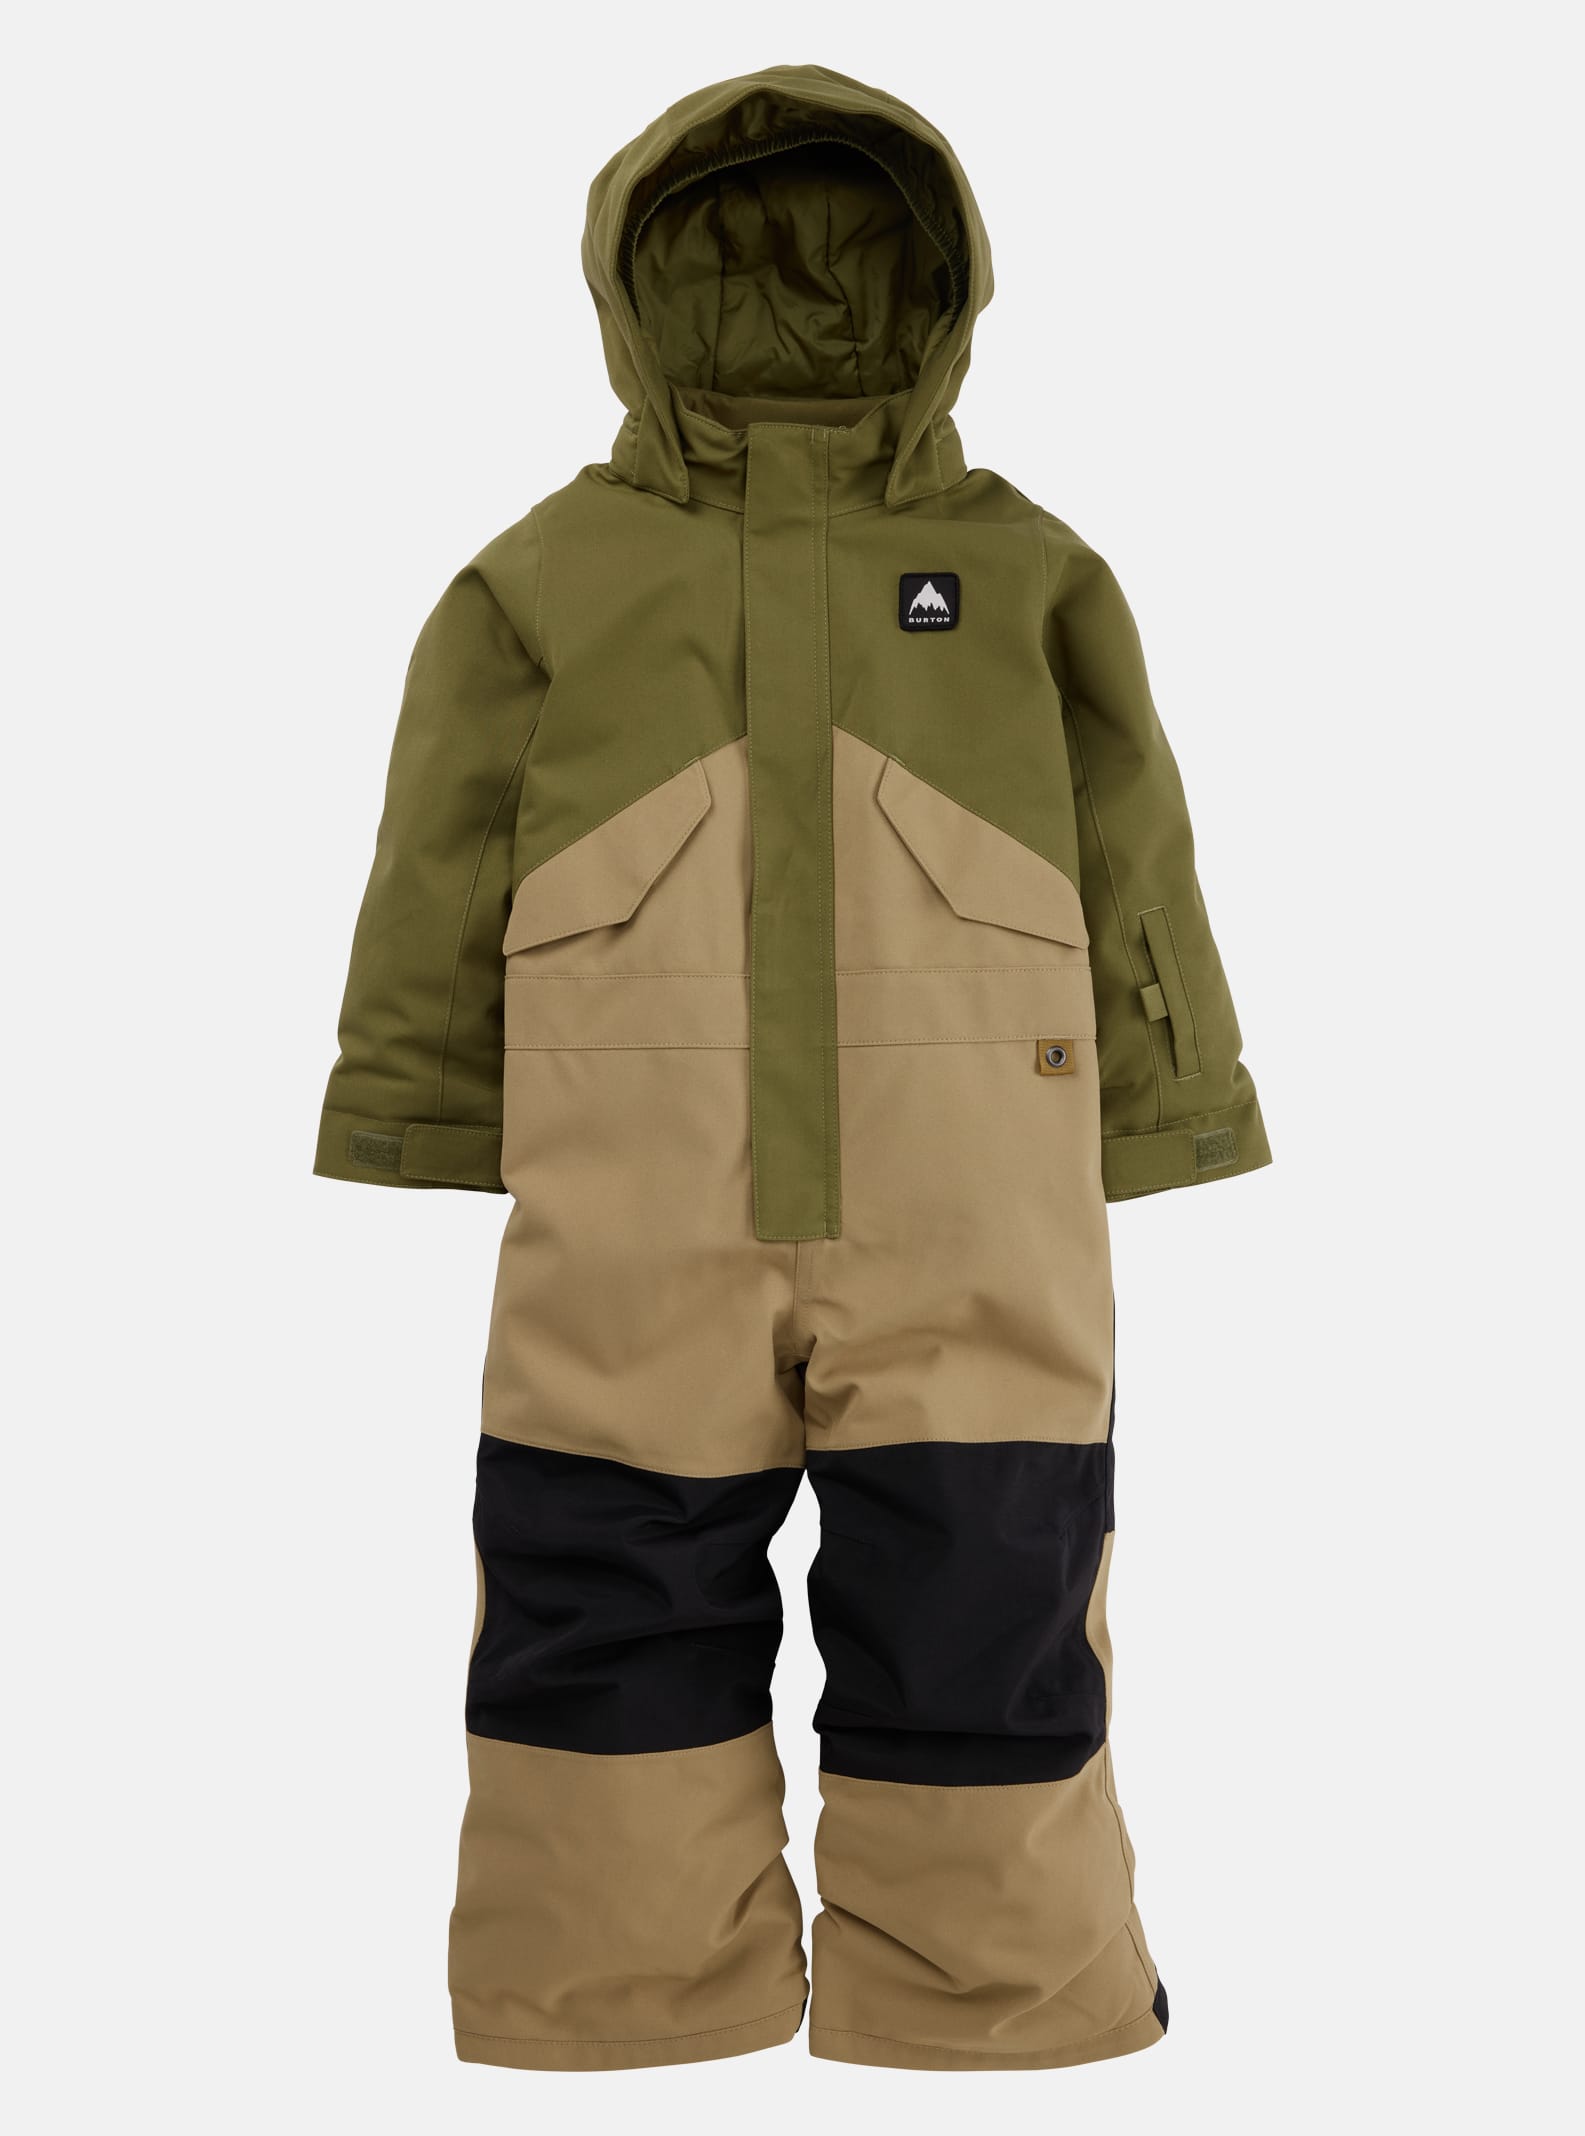 Toddlers' Burton 2L One Piece, Baby Outerwear